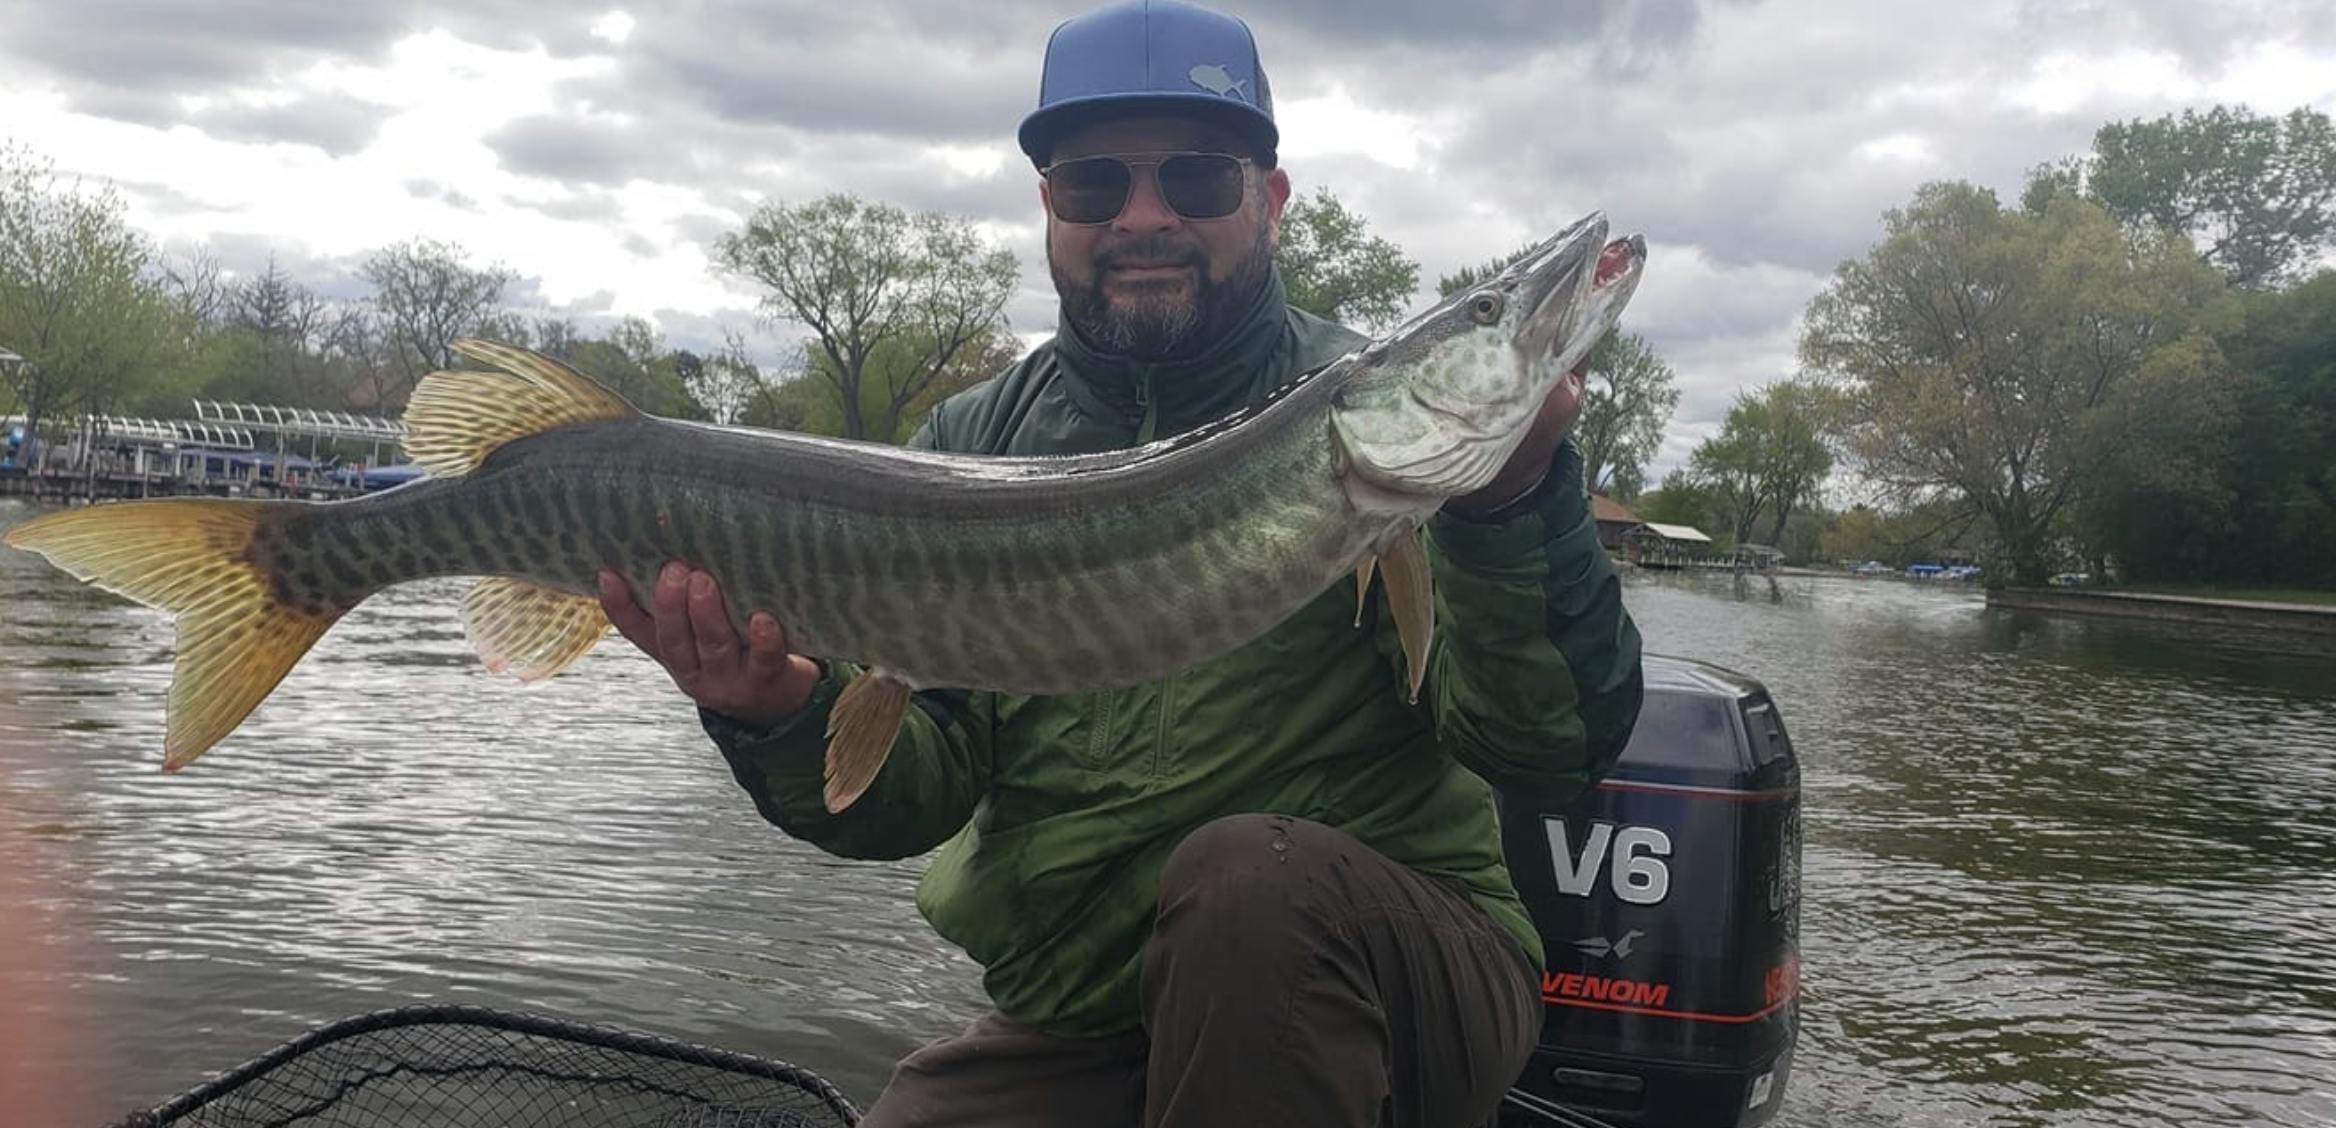 The author holds up a slender 3+ ft long Muskie while sitting in a boat.